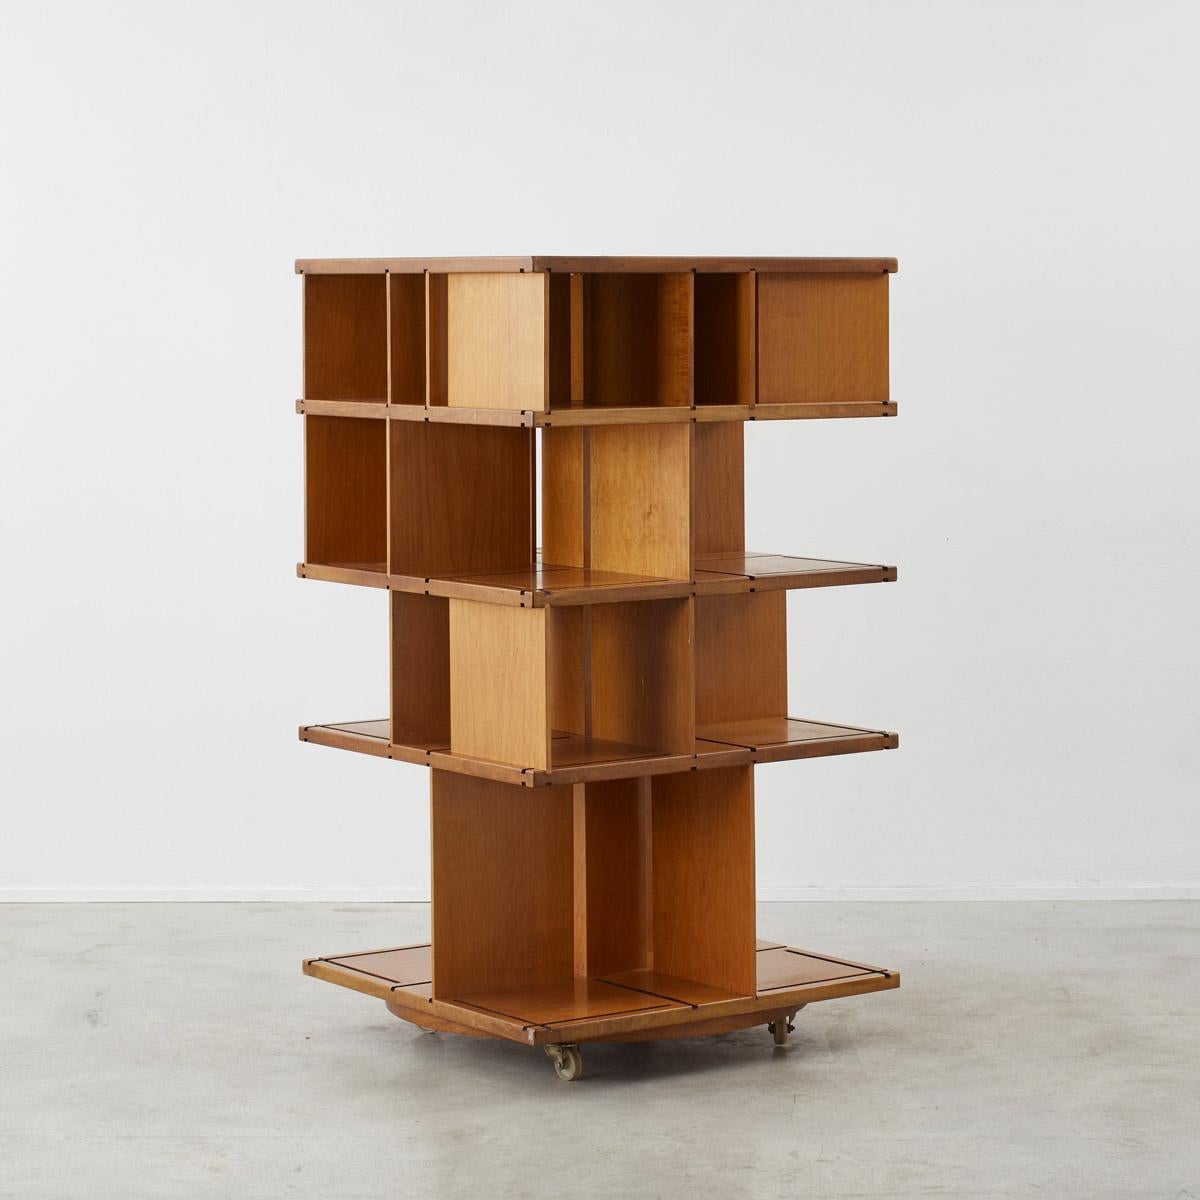 A wooden Italian revolving bookcase with interchangeable partitions – a neat exercise in both function and design.

The piece is presented in original condition with some scuffs and indentations to the wood. Wheels in good working order. Can be